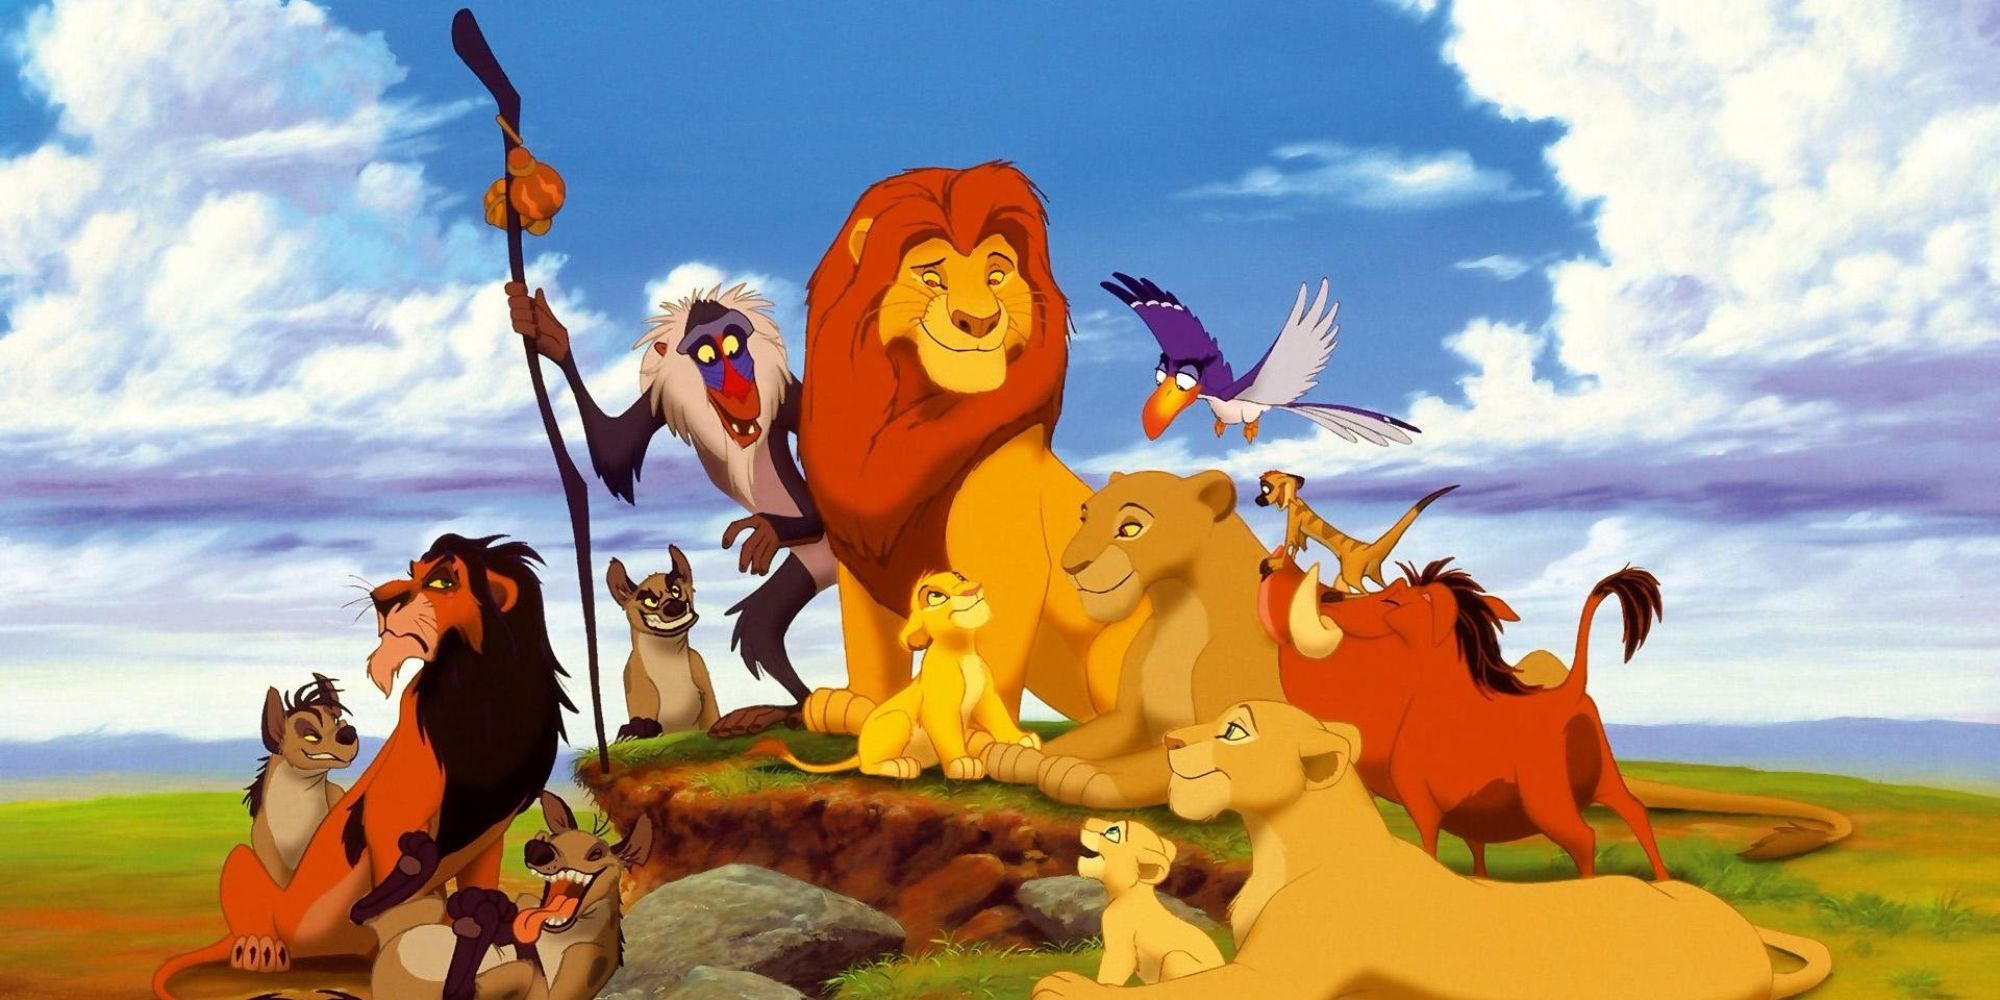 All the Lion King characters together